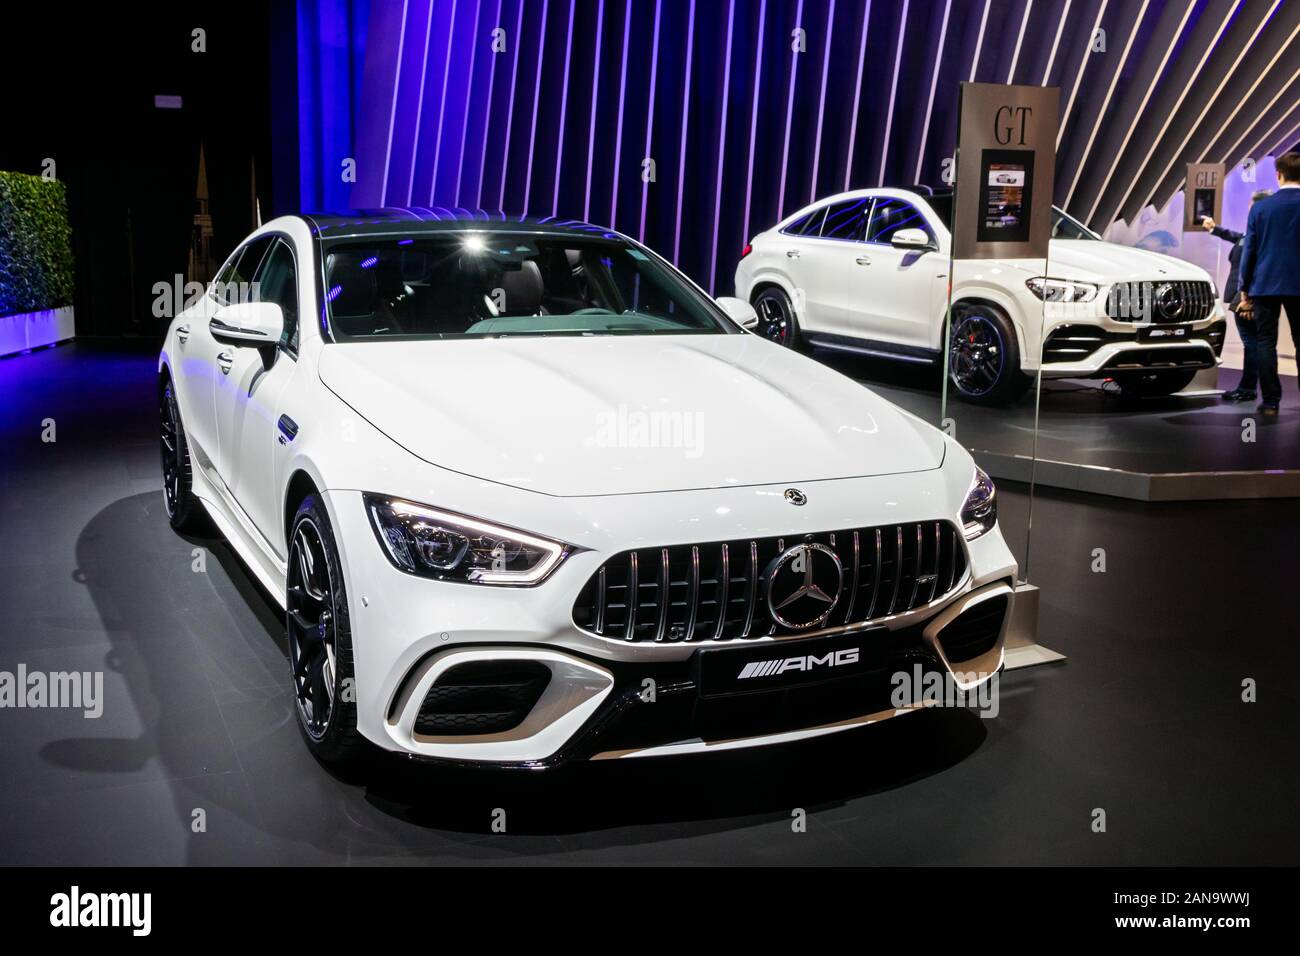 BRUSSELS - JAN 9, 2020: Mercedes AMG GT 63 S sports car presented at the Brussels Autosalon 2020 Motor Show. Stock Photo